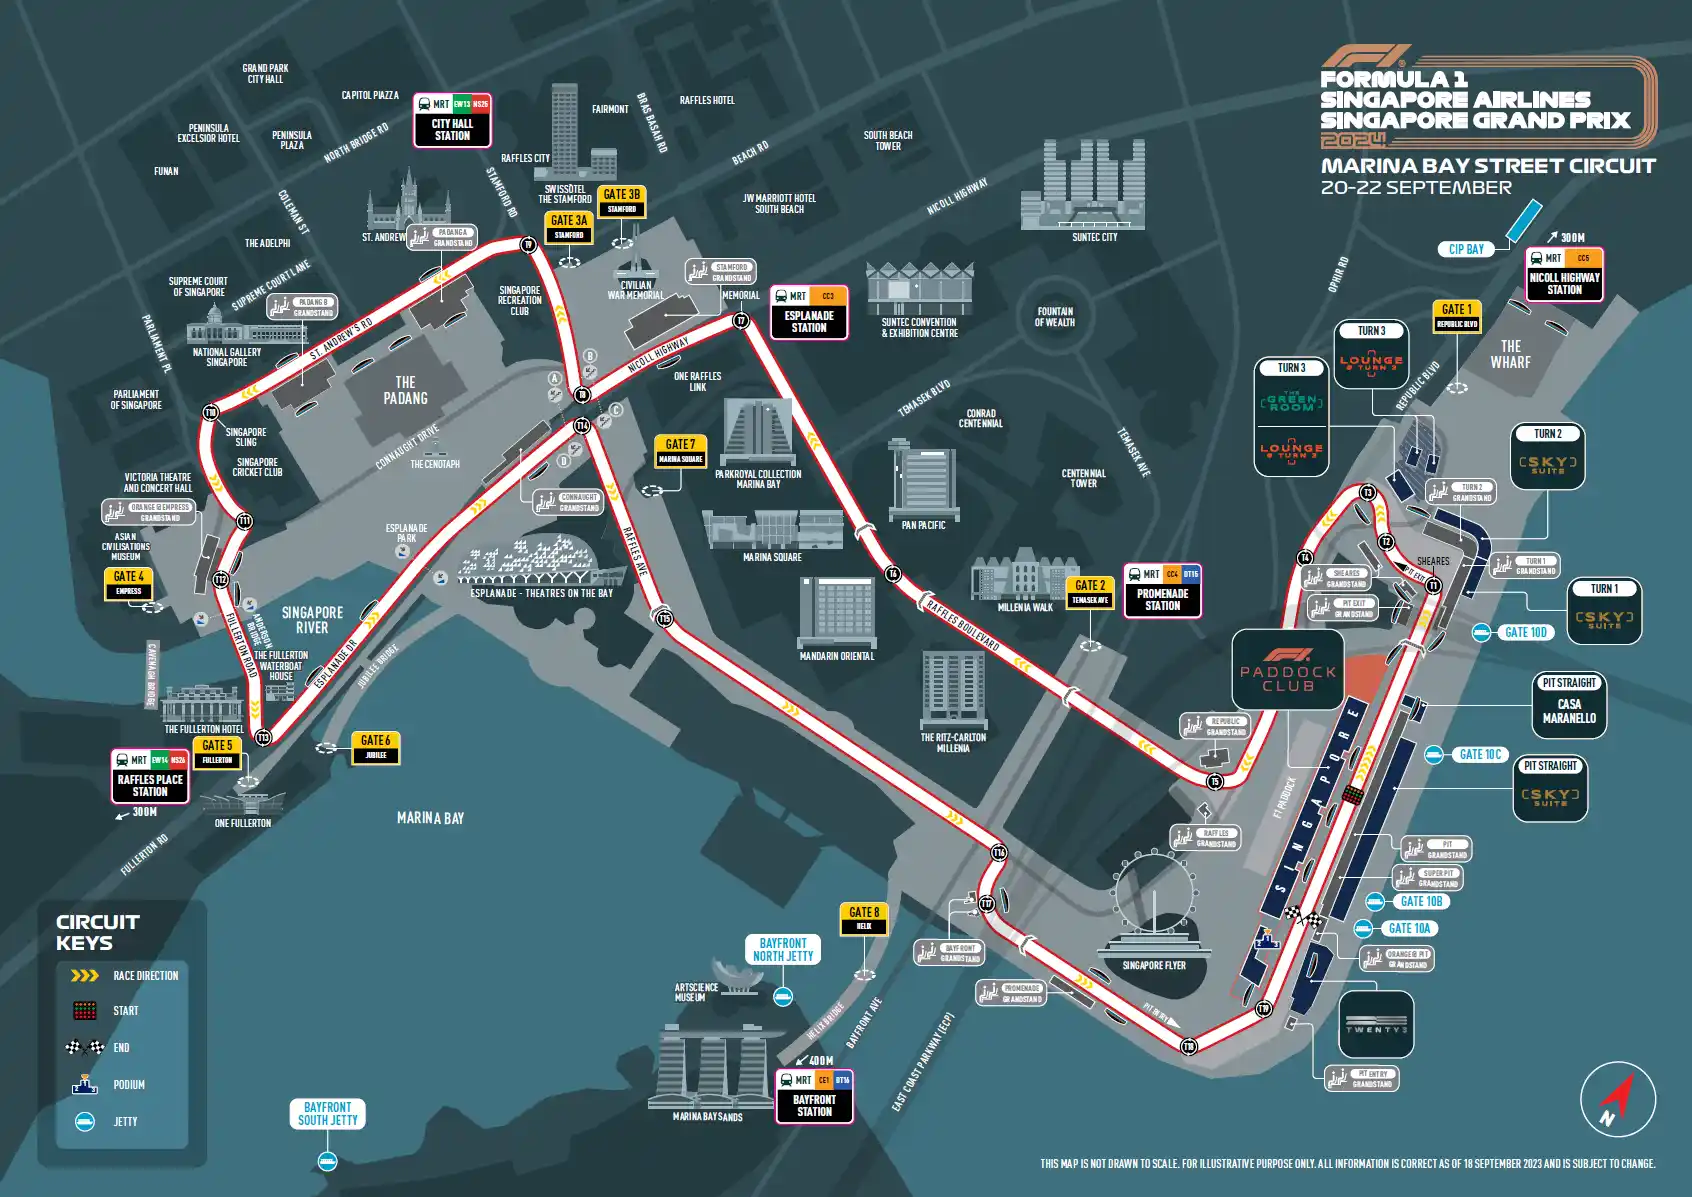 Singapore Grand Prix Circuit Map: This image shows the layout of the Singapore Grand Prix circuit, highlighting key features and turns. It provides an overview of the race track for our Grand Prix packages, helping you visualize the thrilling race experience in Singapore.